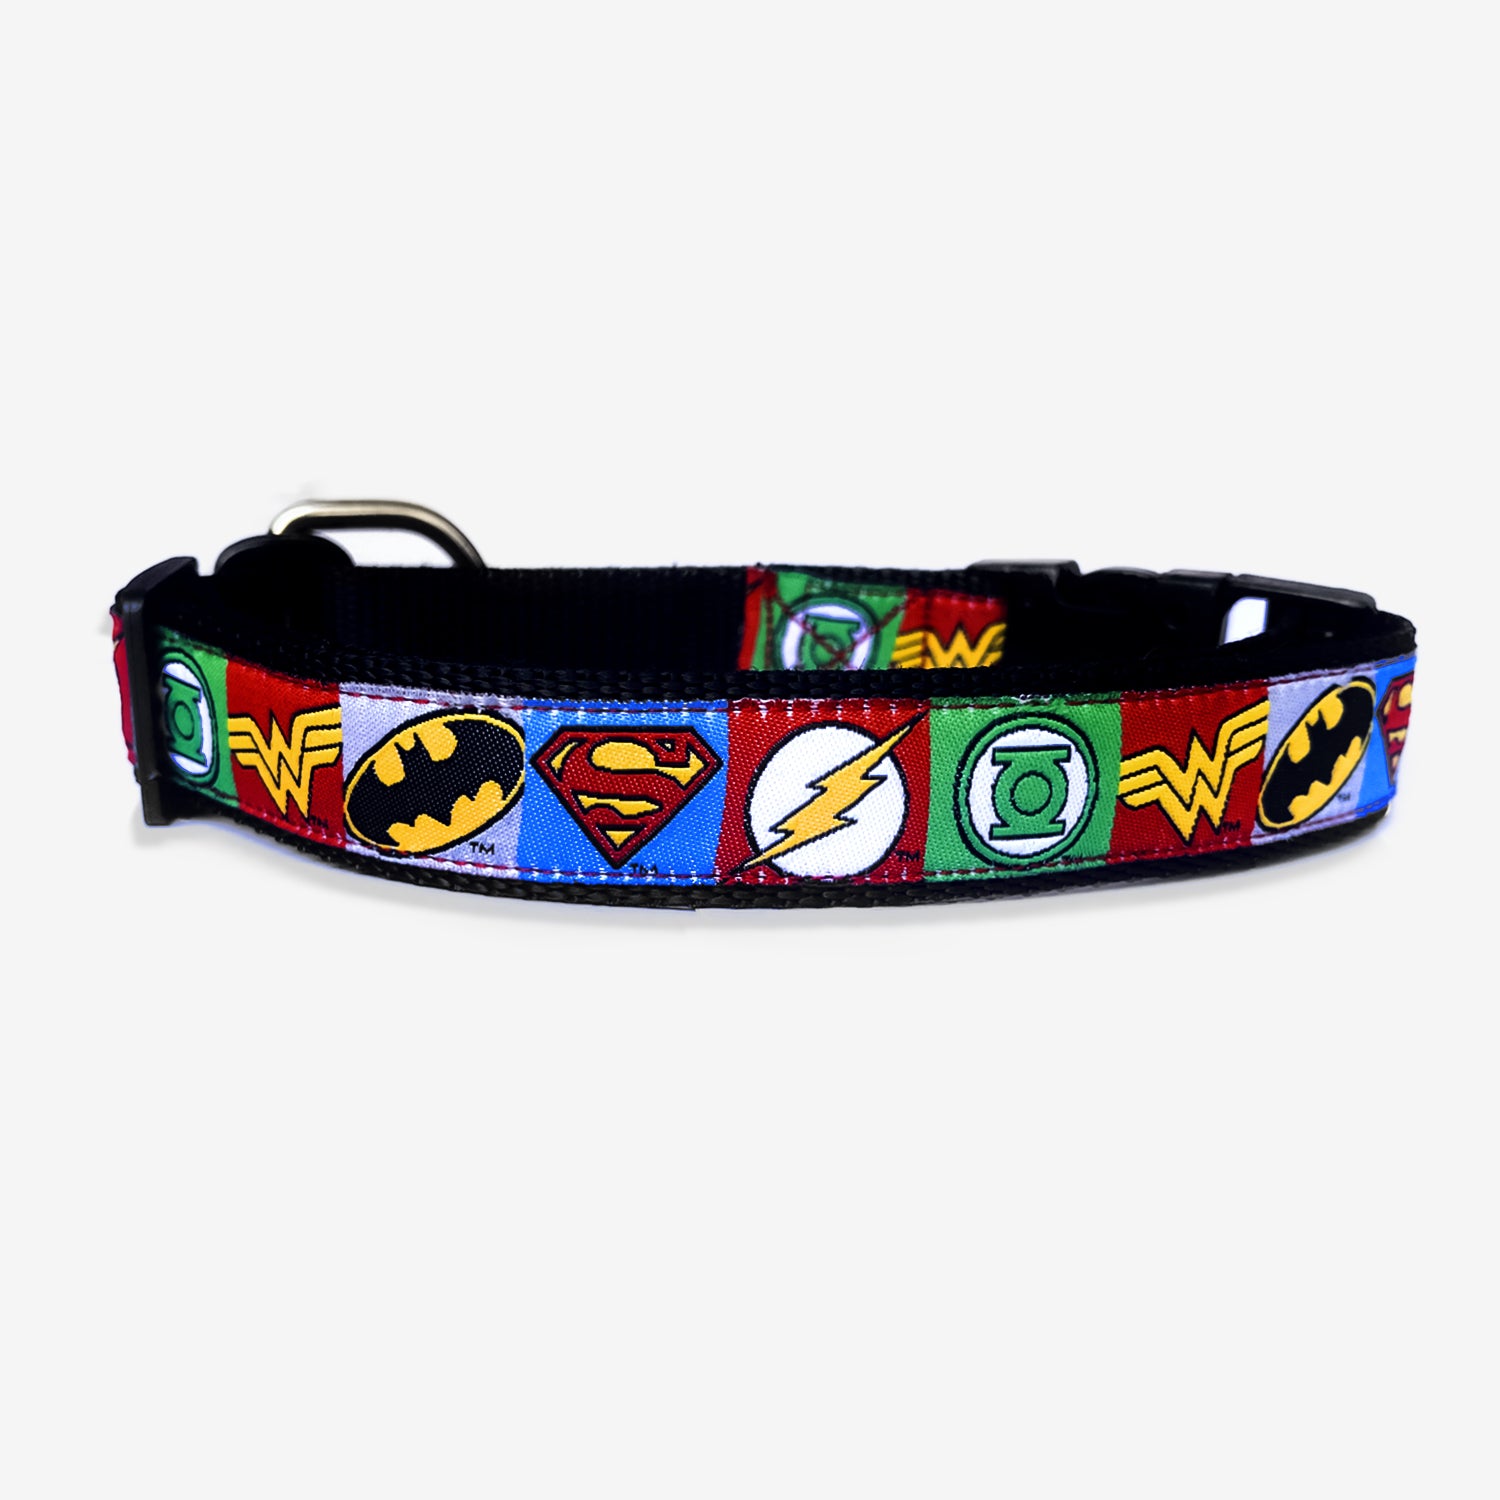 TDIT X ©DC Justice League Dog Collar That Dog In Tuxedo